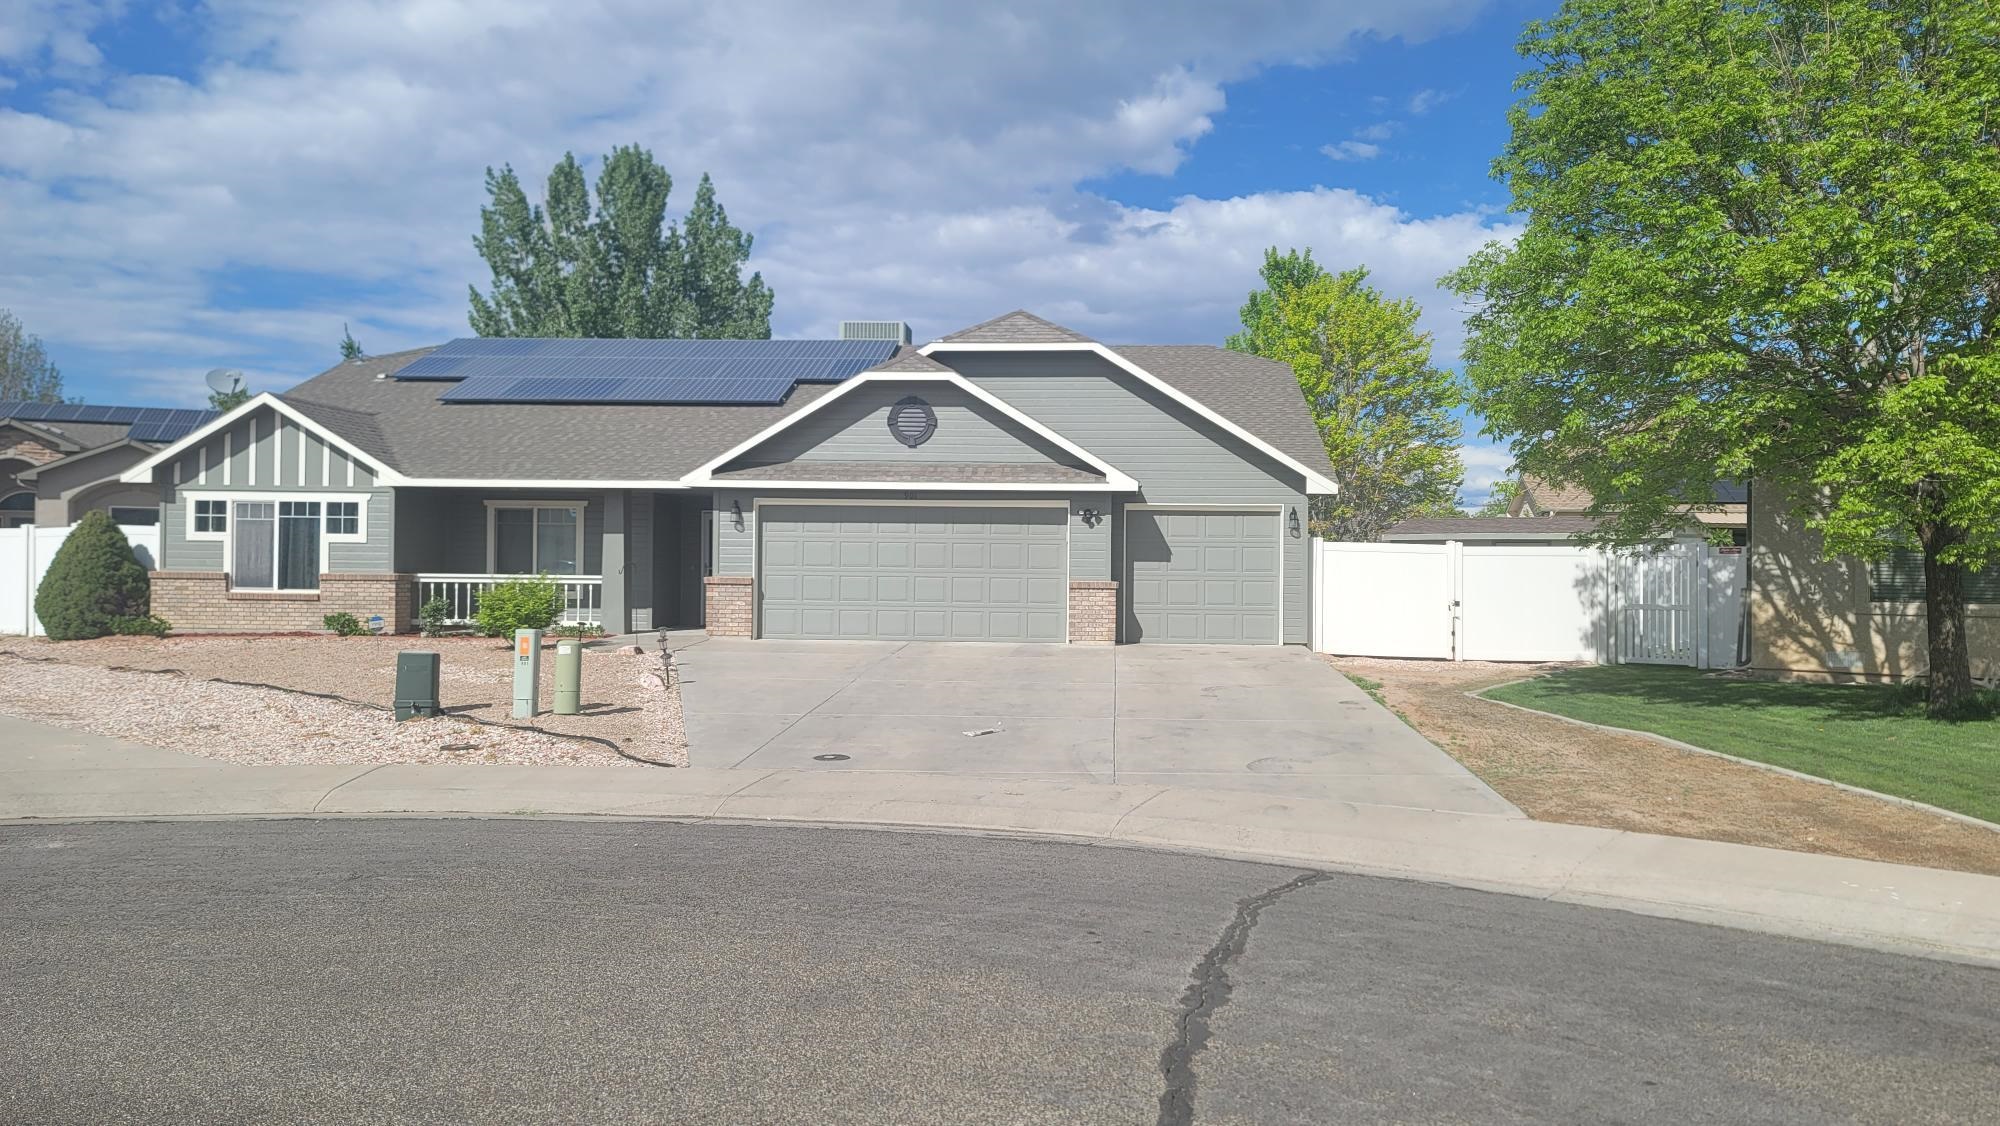 Beautiful home in the desirable Queens subdivision in Fruita. This home has a large 3 car garage spacious living area with a separate family room. Large back yard with beautiful landscaping. Shed included. Brand new appliances, A/C unit and hot water heater. Schedule your showing asap as this one wont last long!!